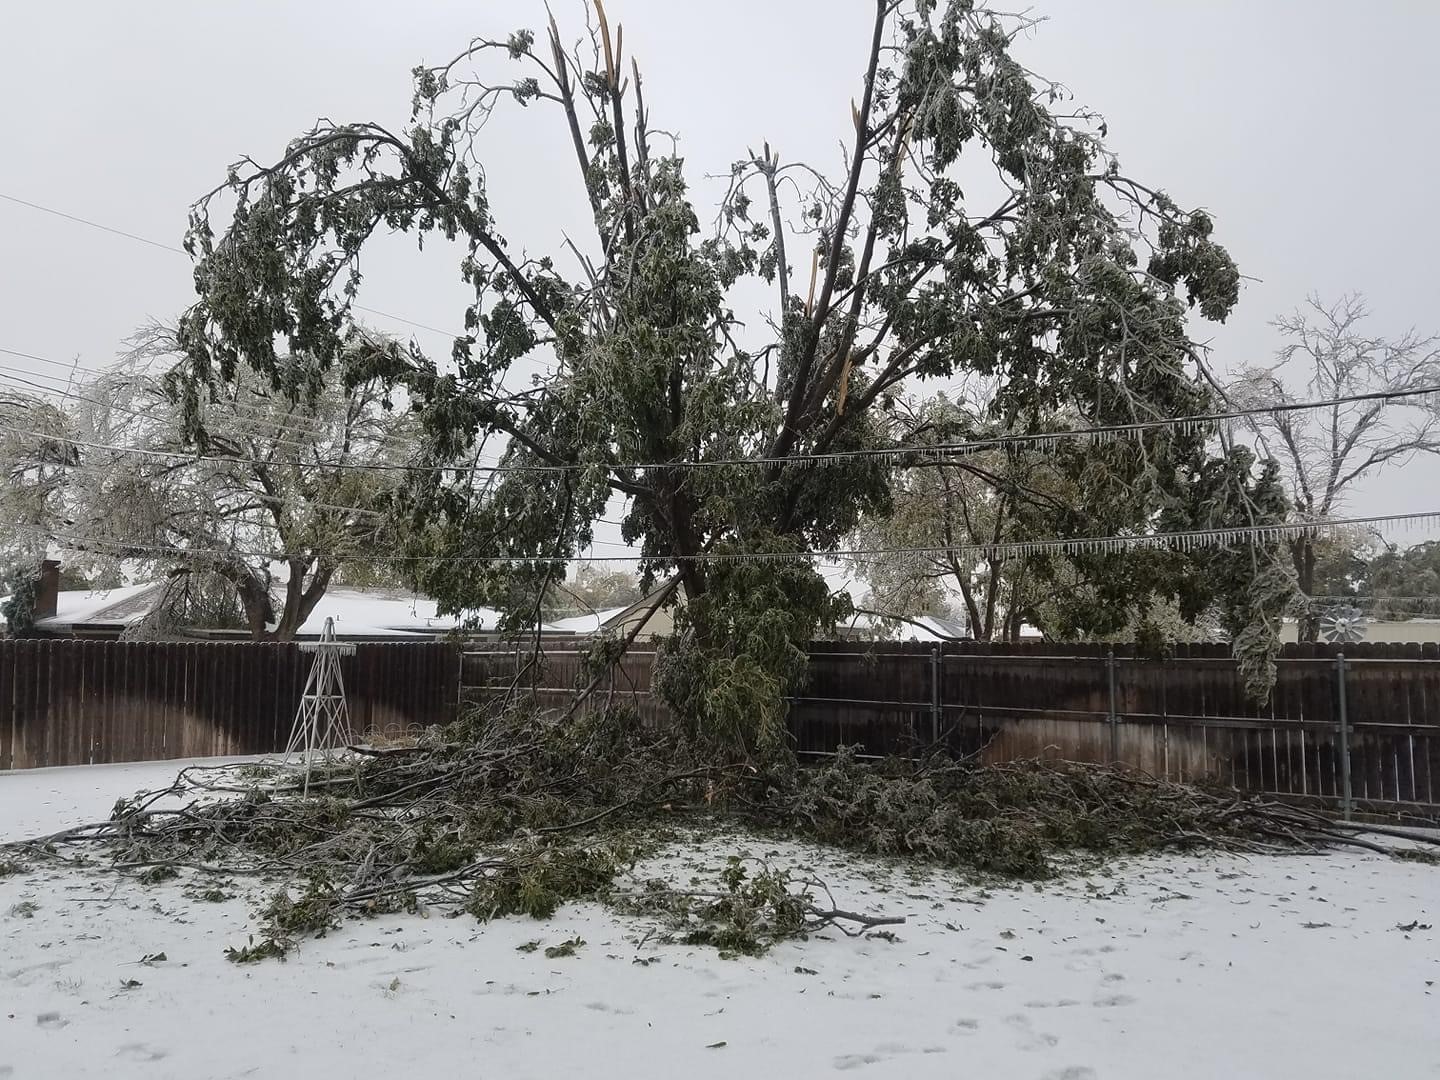 An ice storm intensely damaged this pecan tree. 